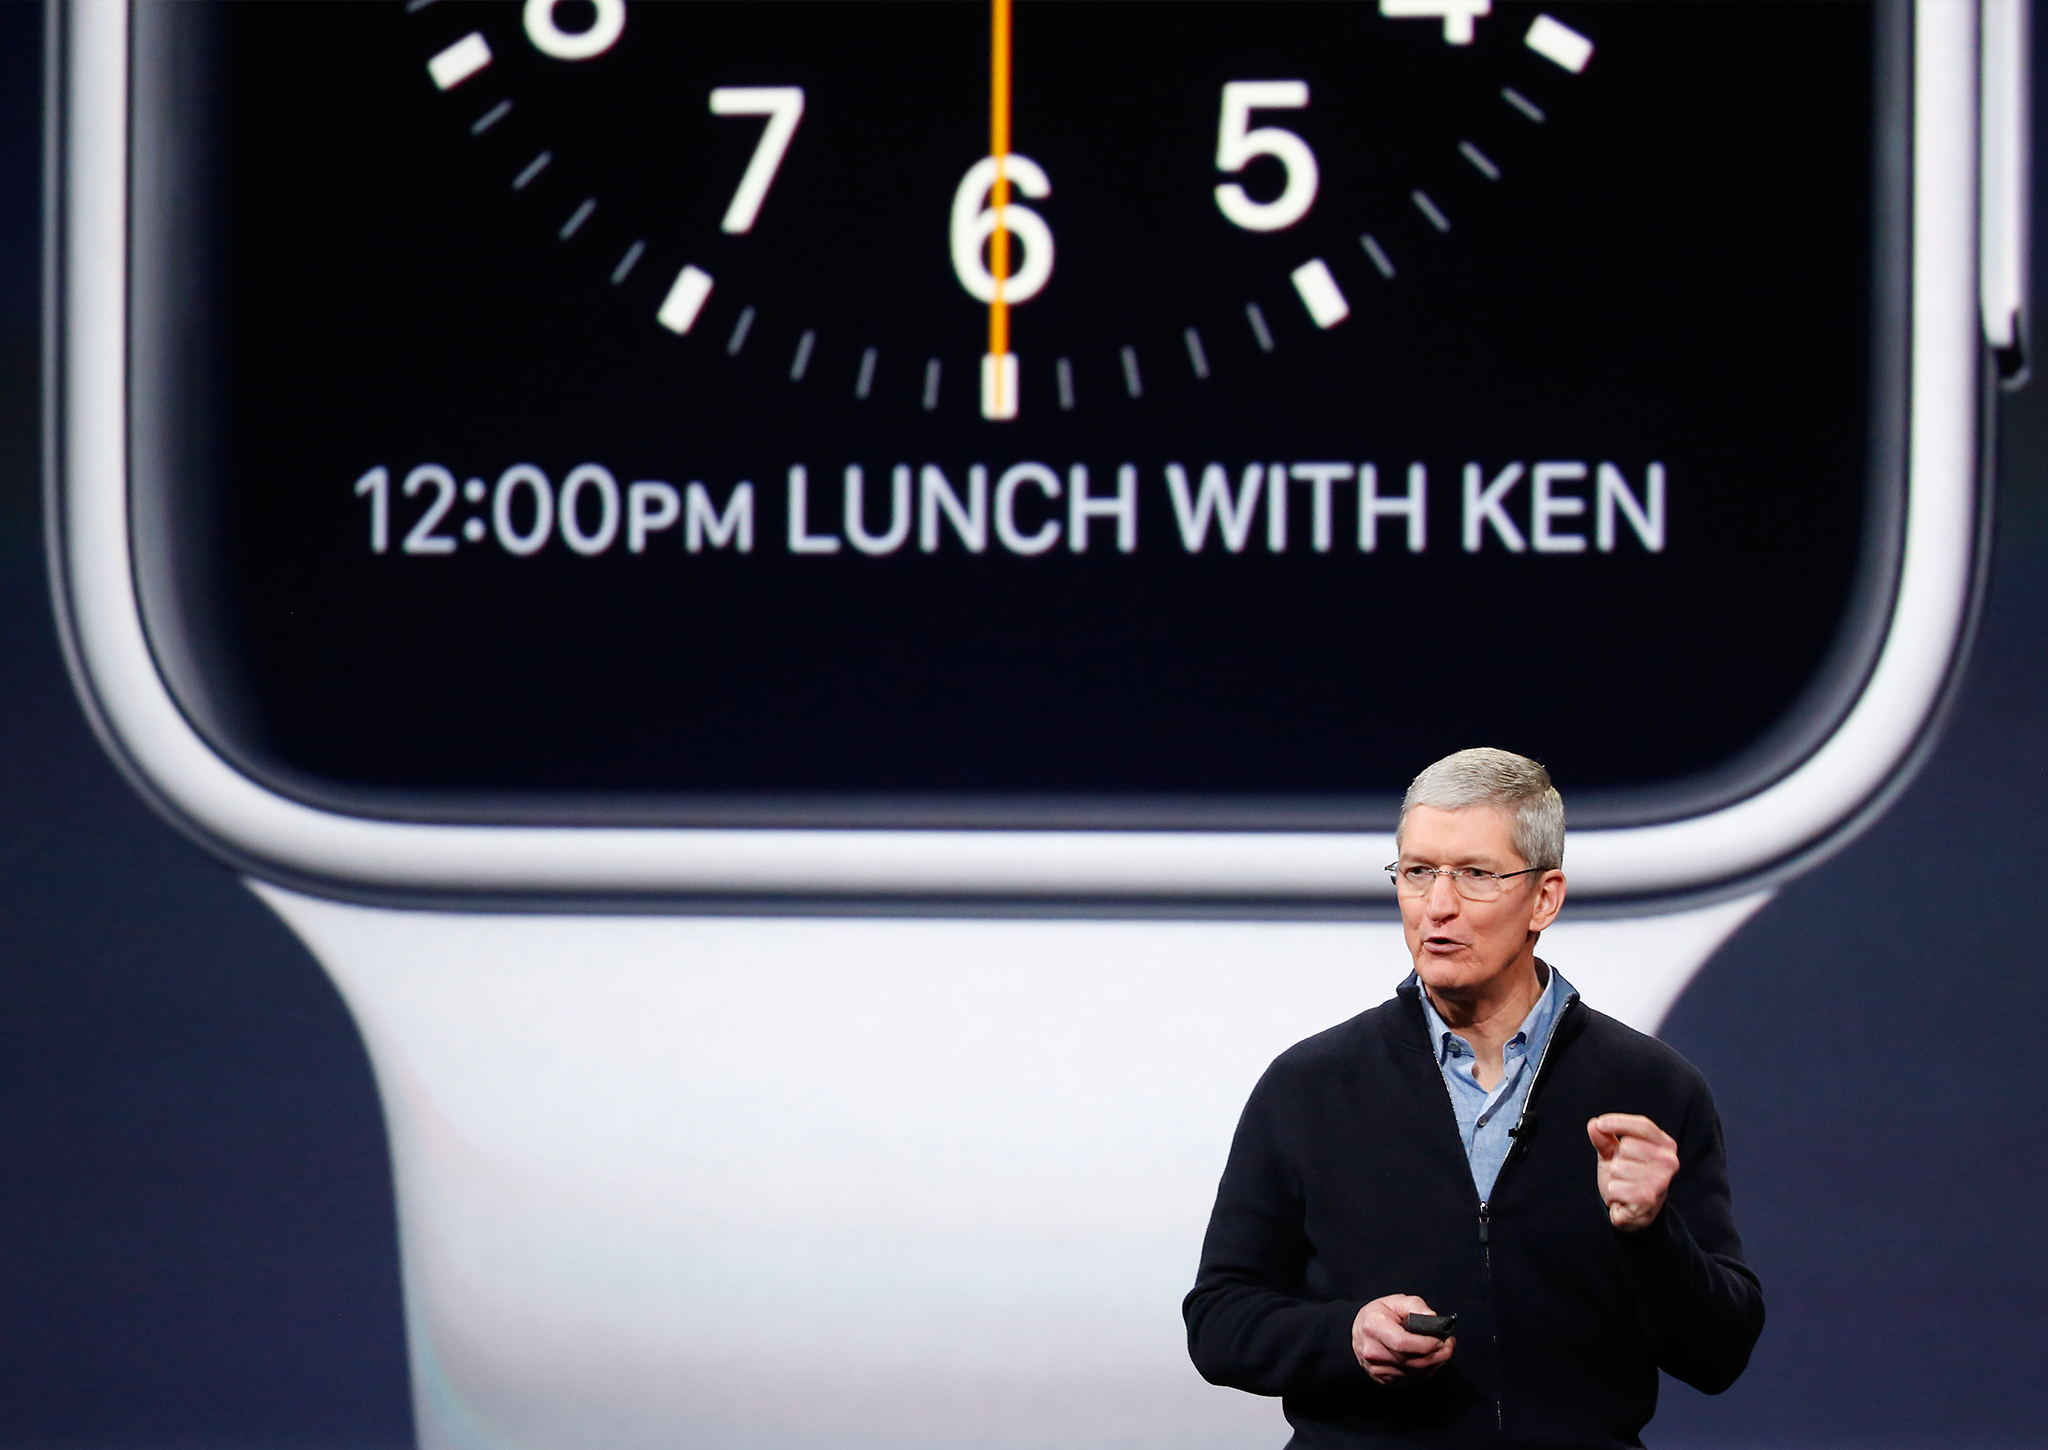 San Francisco, seen here announcing Tim Cook's lunch with Ken